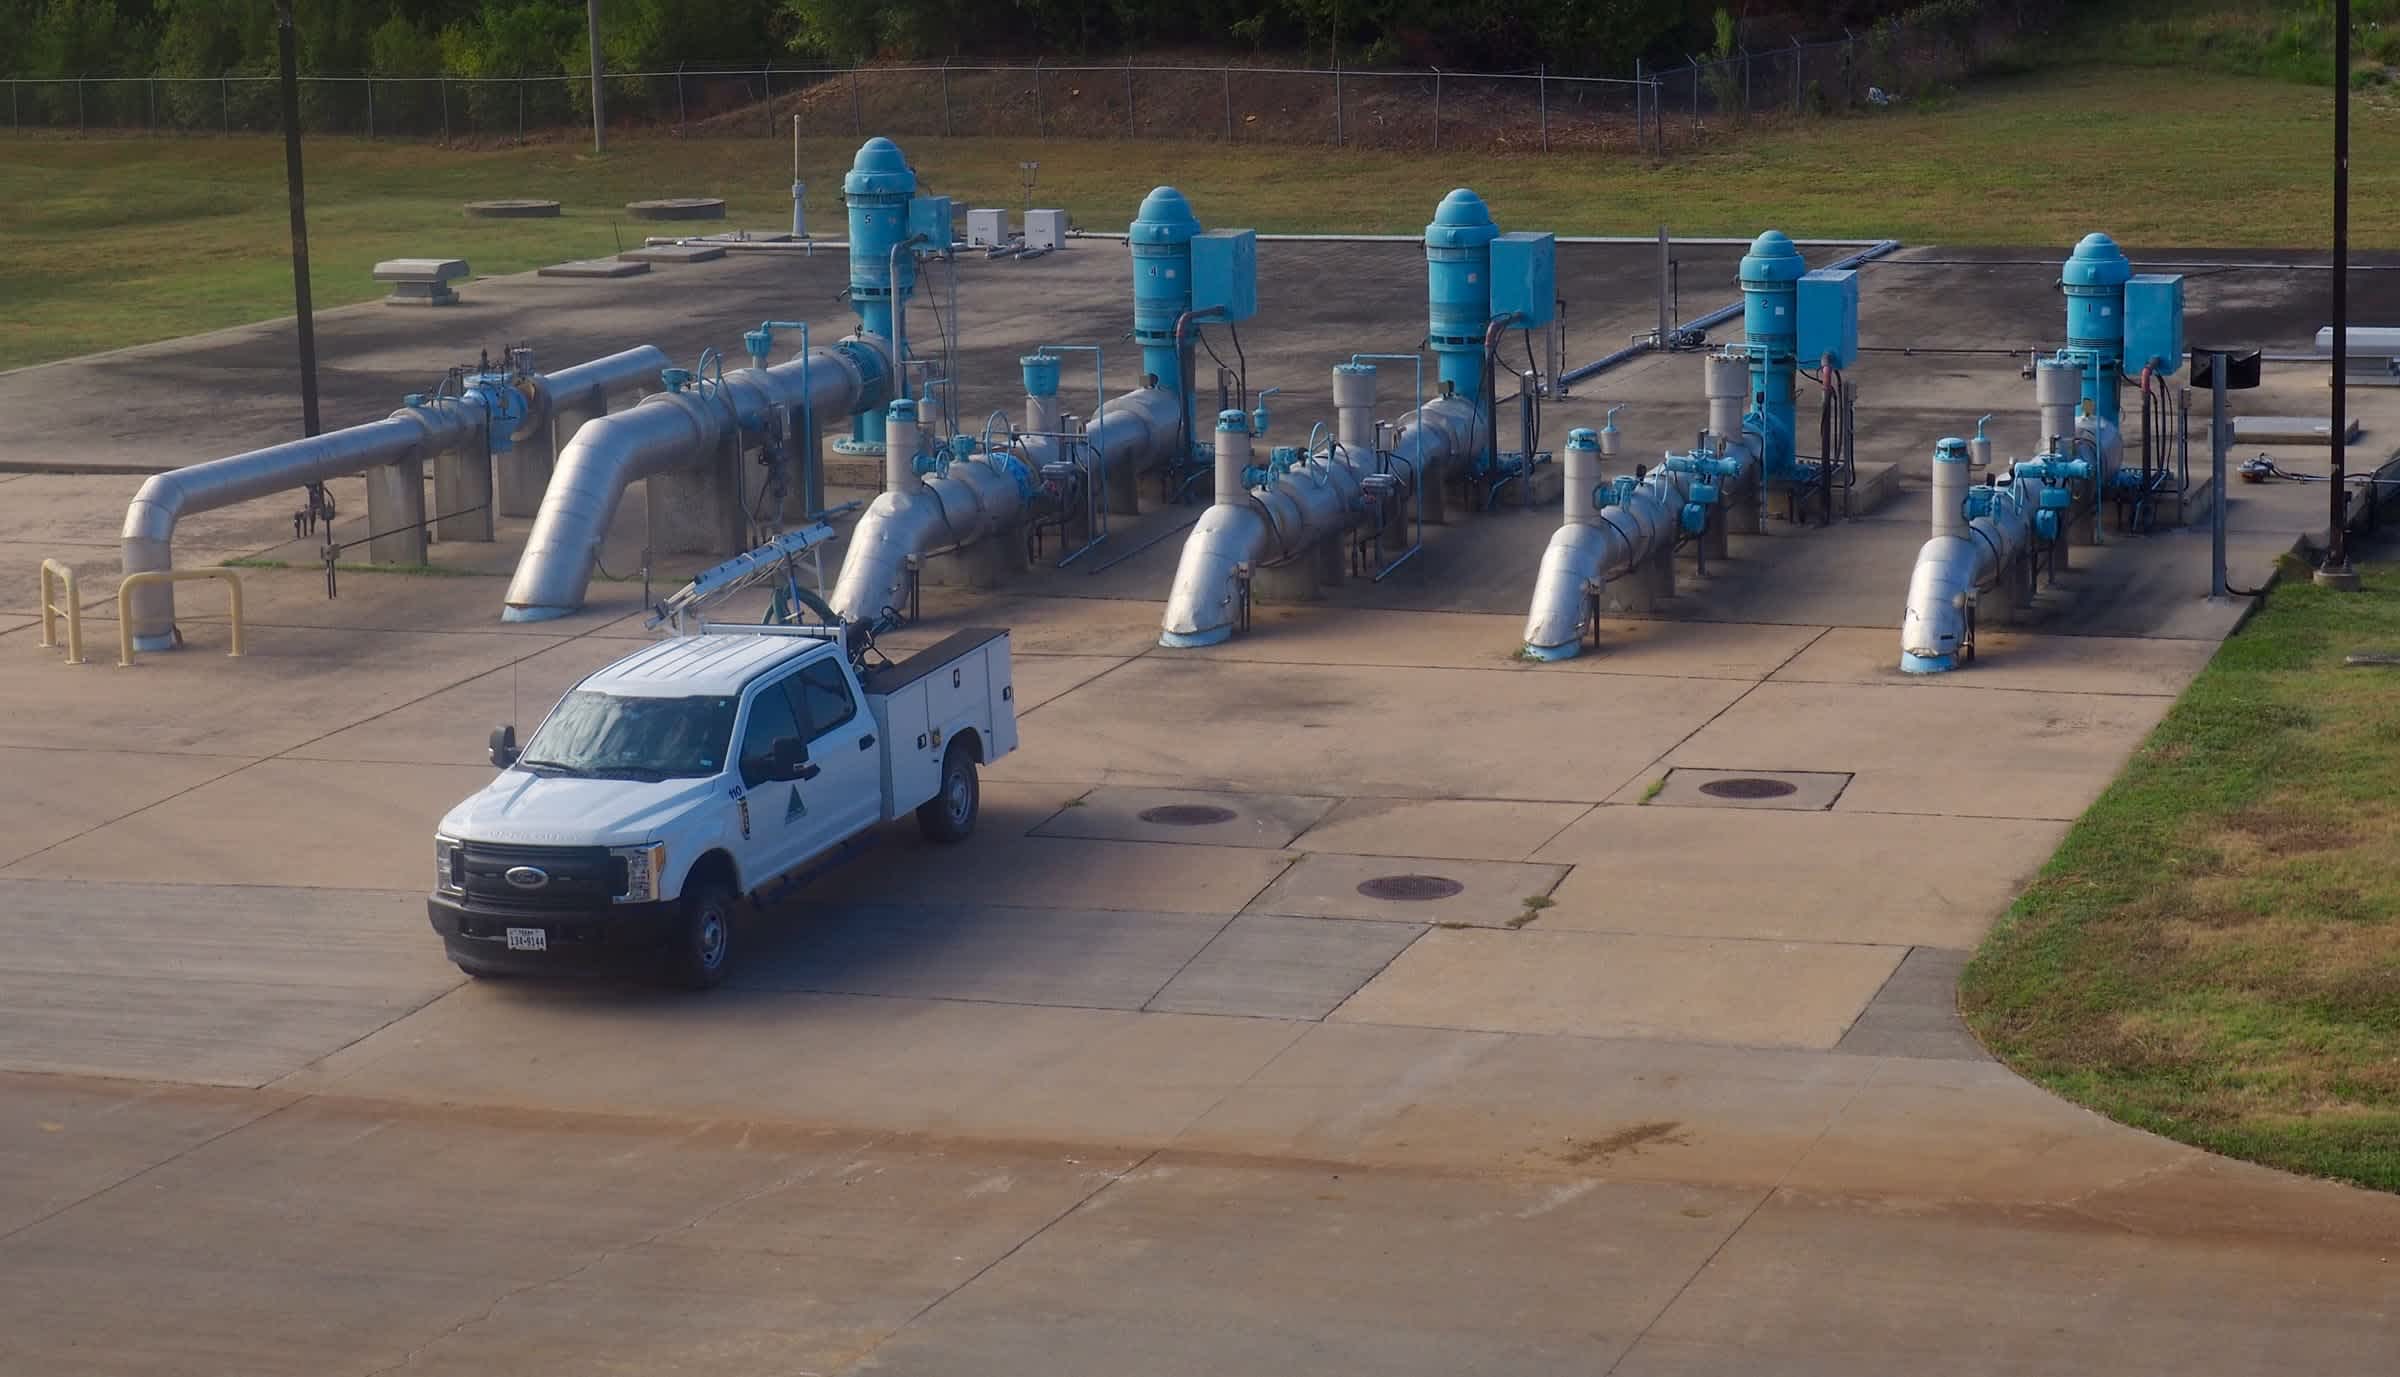 Pumps push treated water out of an underground concrete holding tank through over 103 miles of pipeline to customers across UTRWD's service area.